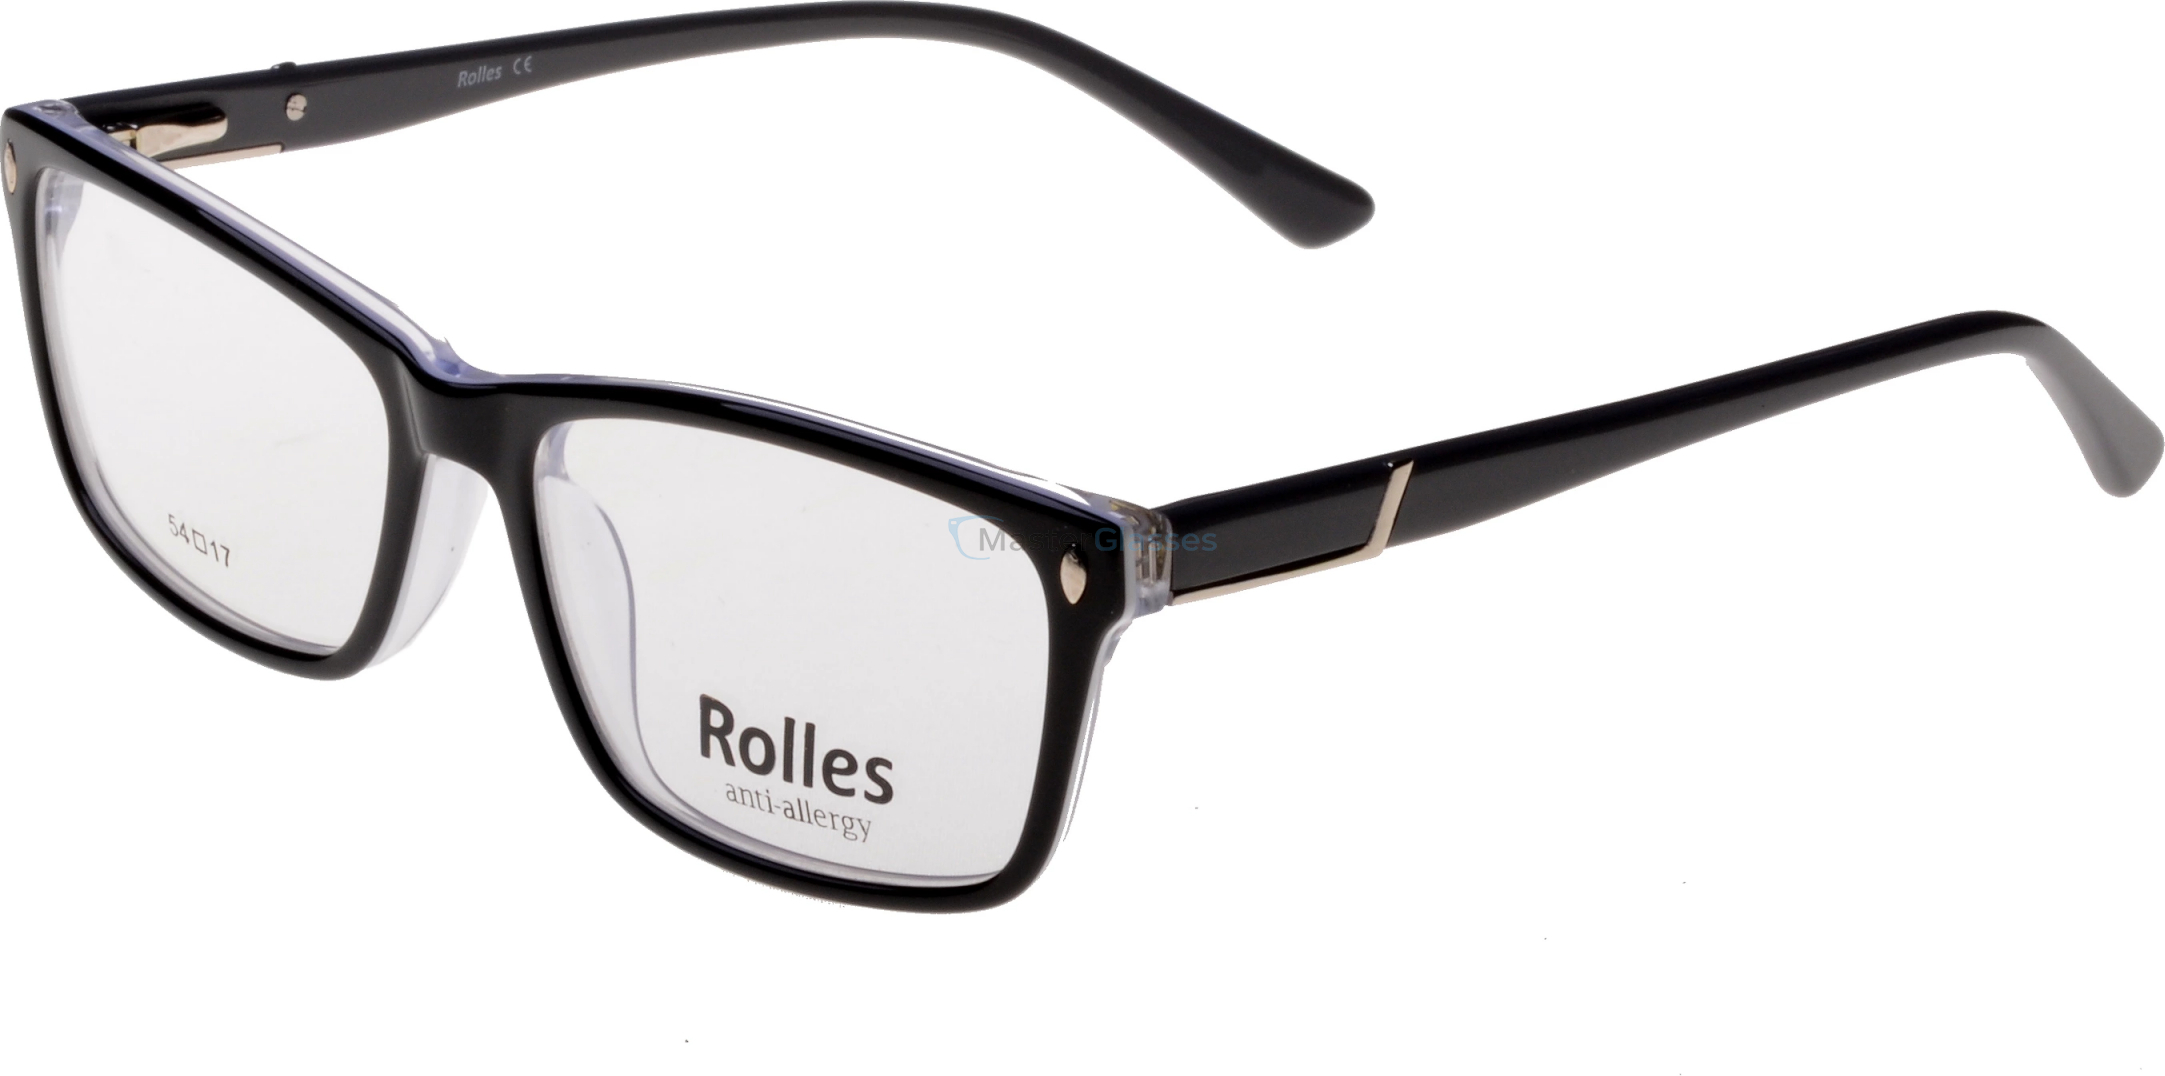  Rolles 421 01